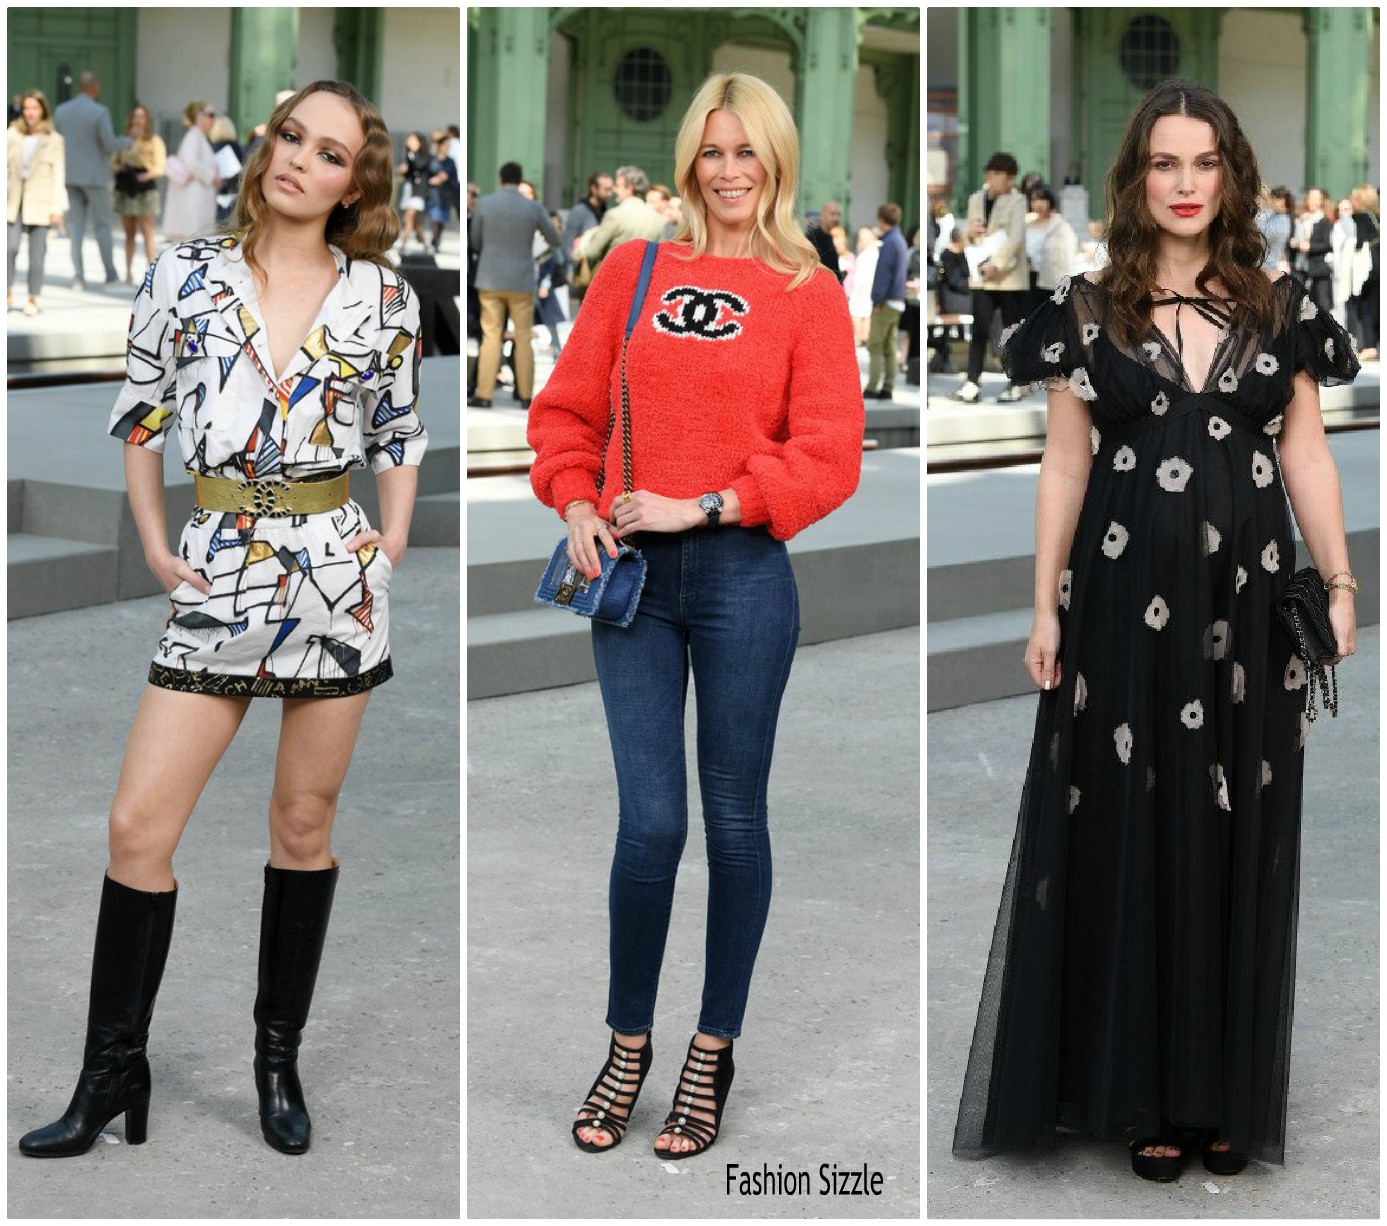 frontrow-chanel-cruise-2010-fashion show